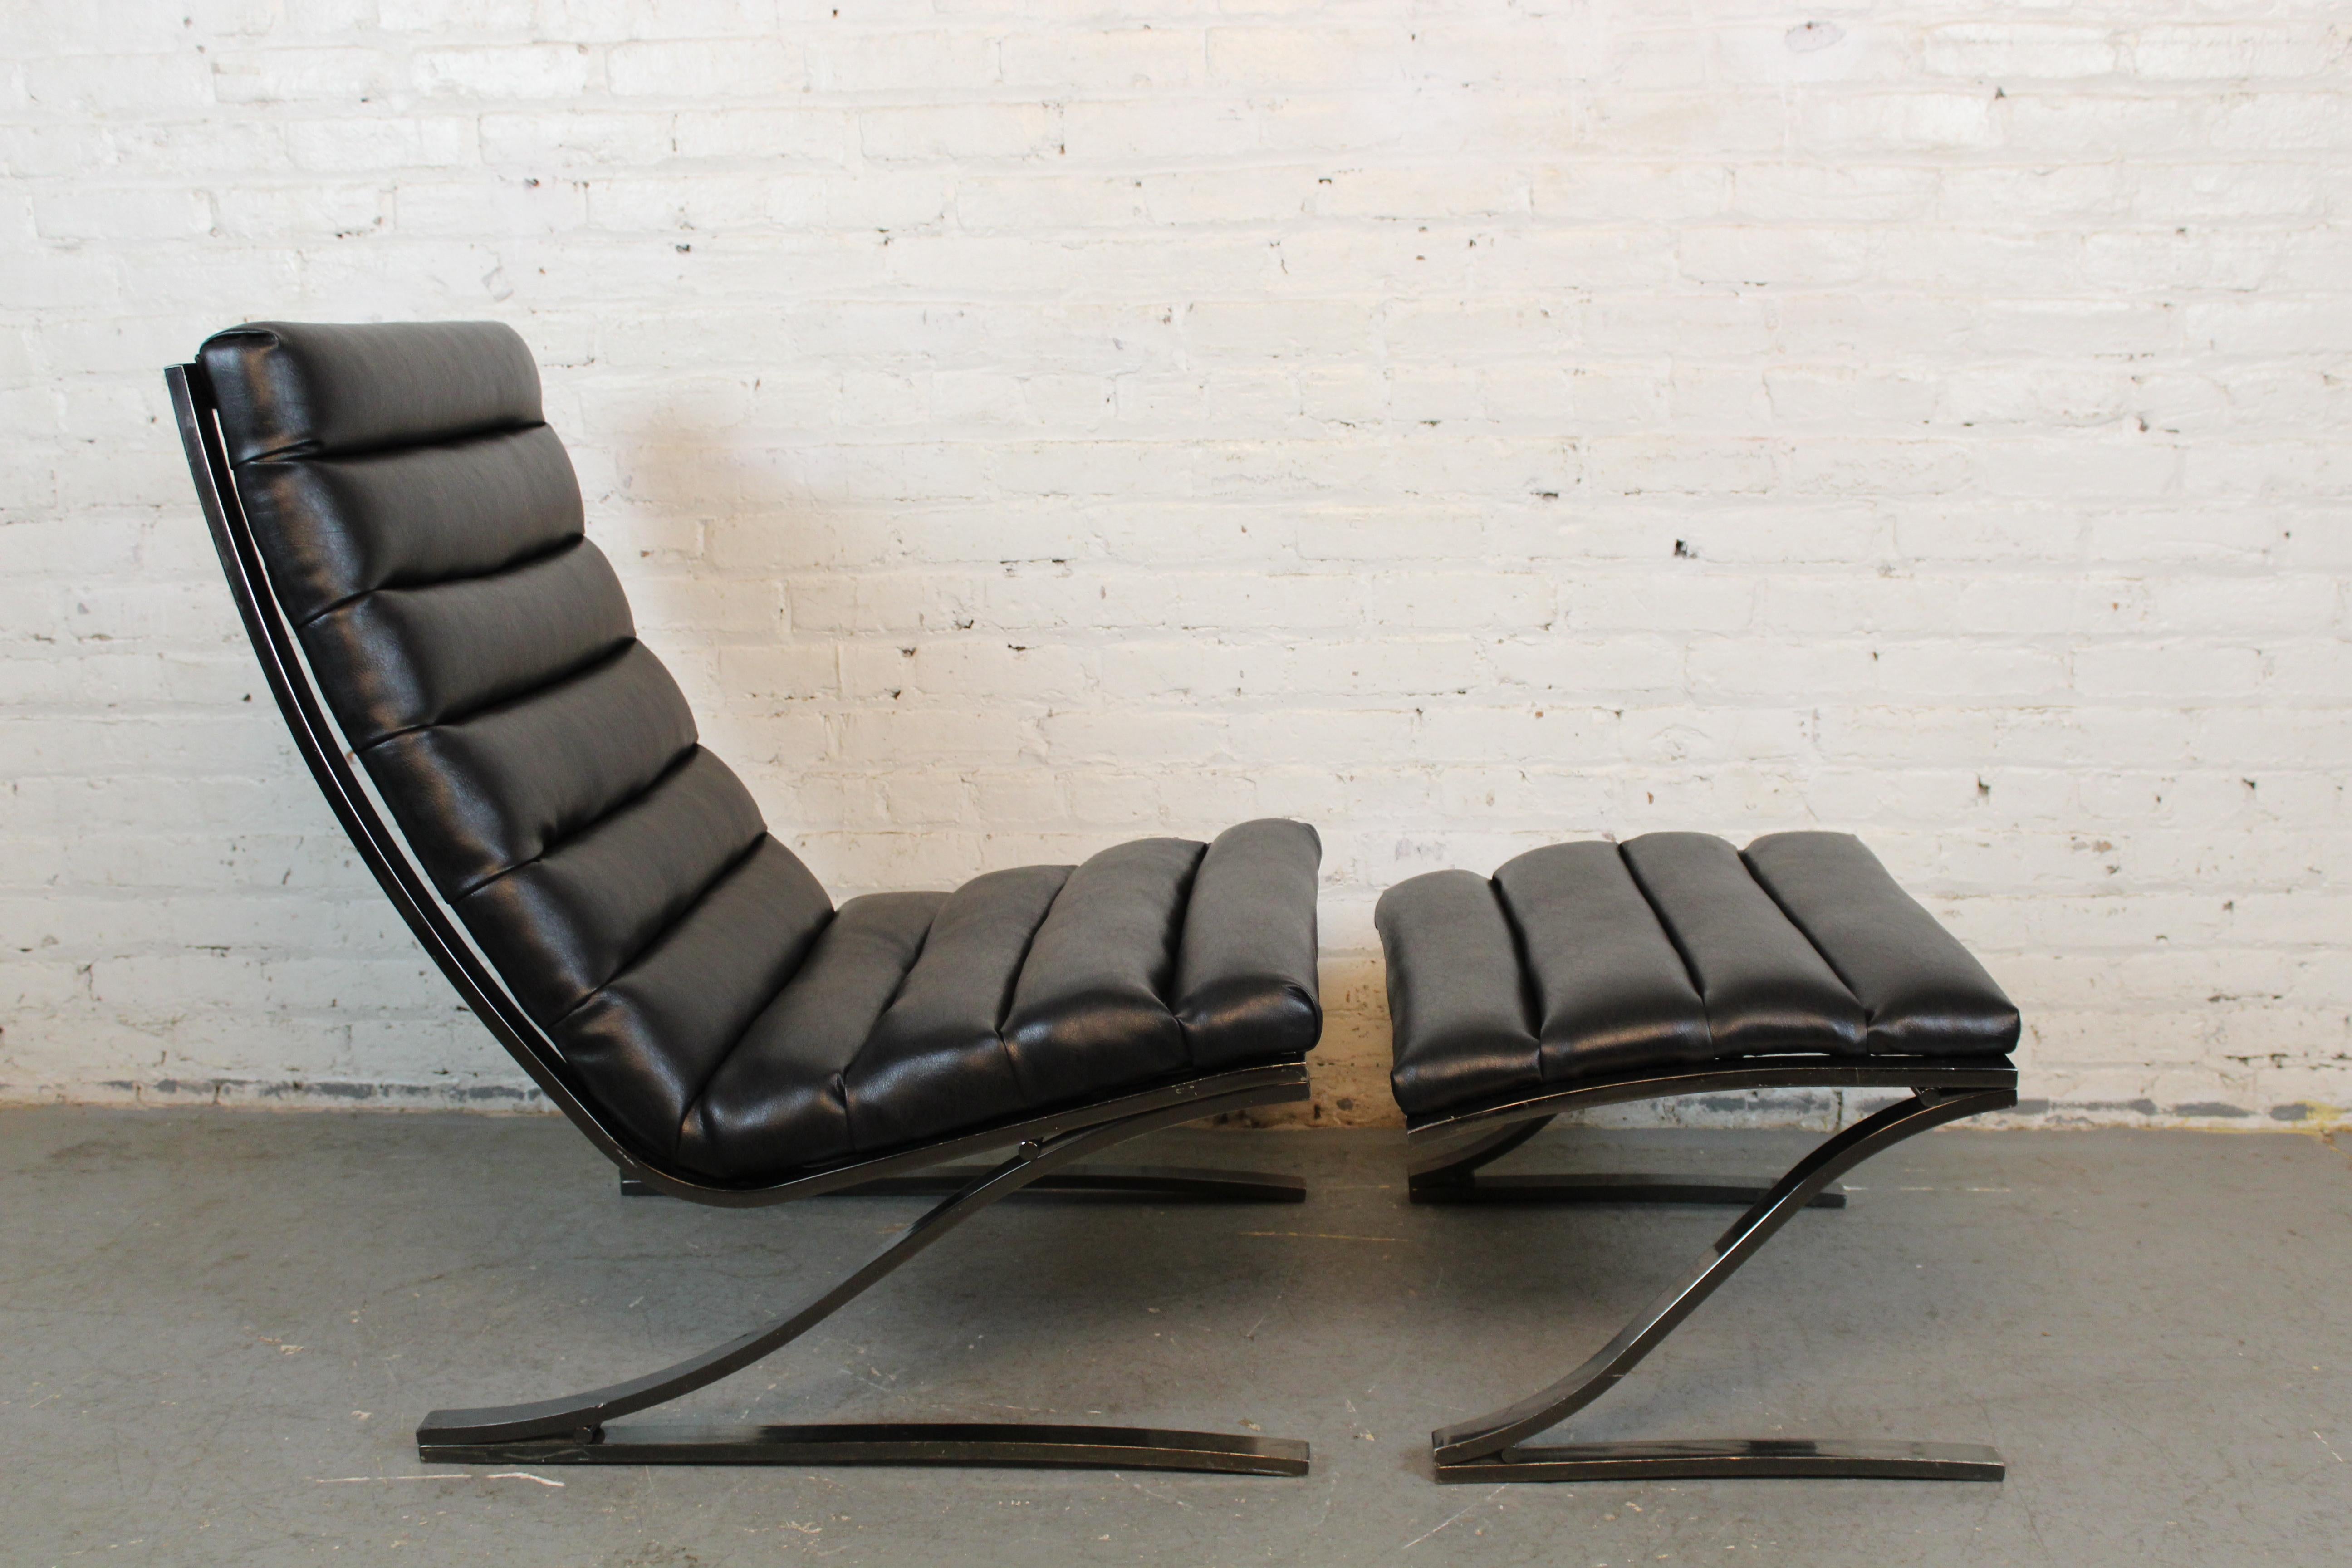 Bring home the fabulous stylings of post-modern furniture with this fantastic cantilevered scoop lounge and ottoman by Design Institute America, or DIA, circa 1986. Newly reupholstered in a luxurious black vegan leather and featuring a clean base